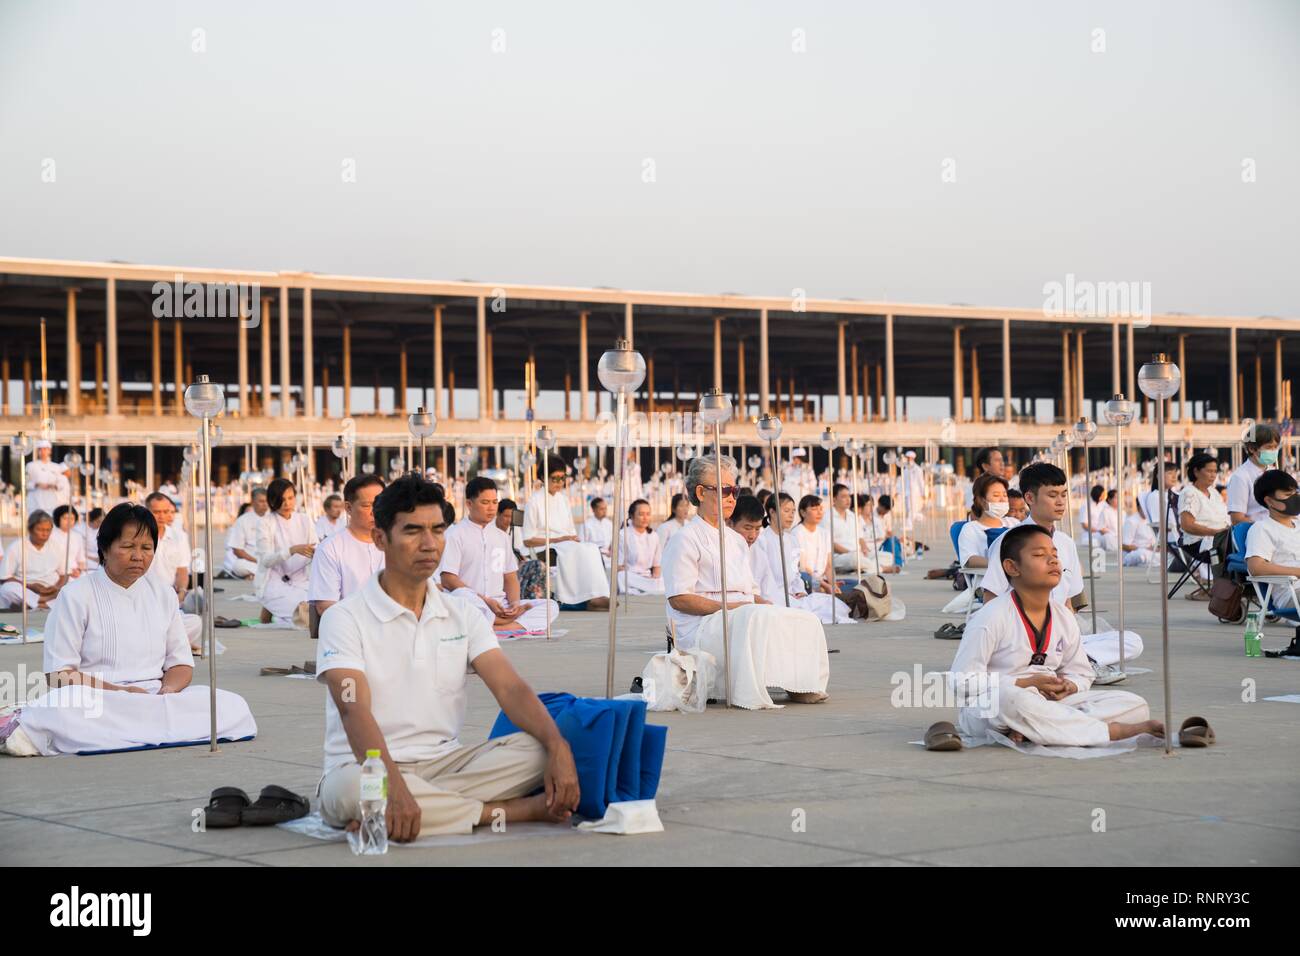 Devotees seen meditating during the yearly Makha Bucha ceremony. Buddhist devotees celebrate the annual festival of Makha Bucha, one of the most important day for buddhists around the world. More than a thousand monks and hundred of thousand devotees were gathering at Dhammakaya Temple in Bangkok to attend the lighting ceremony. Stock Photo